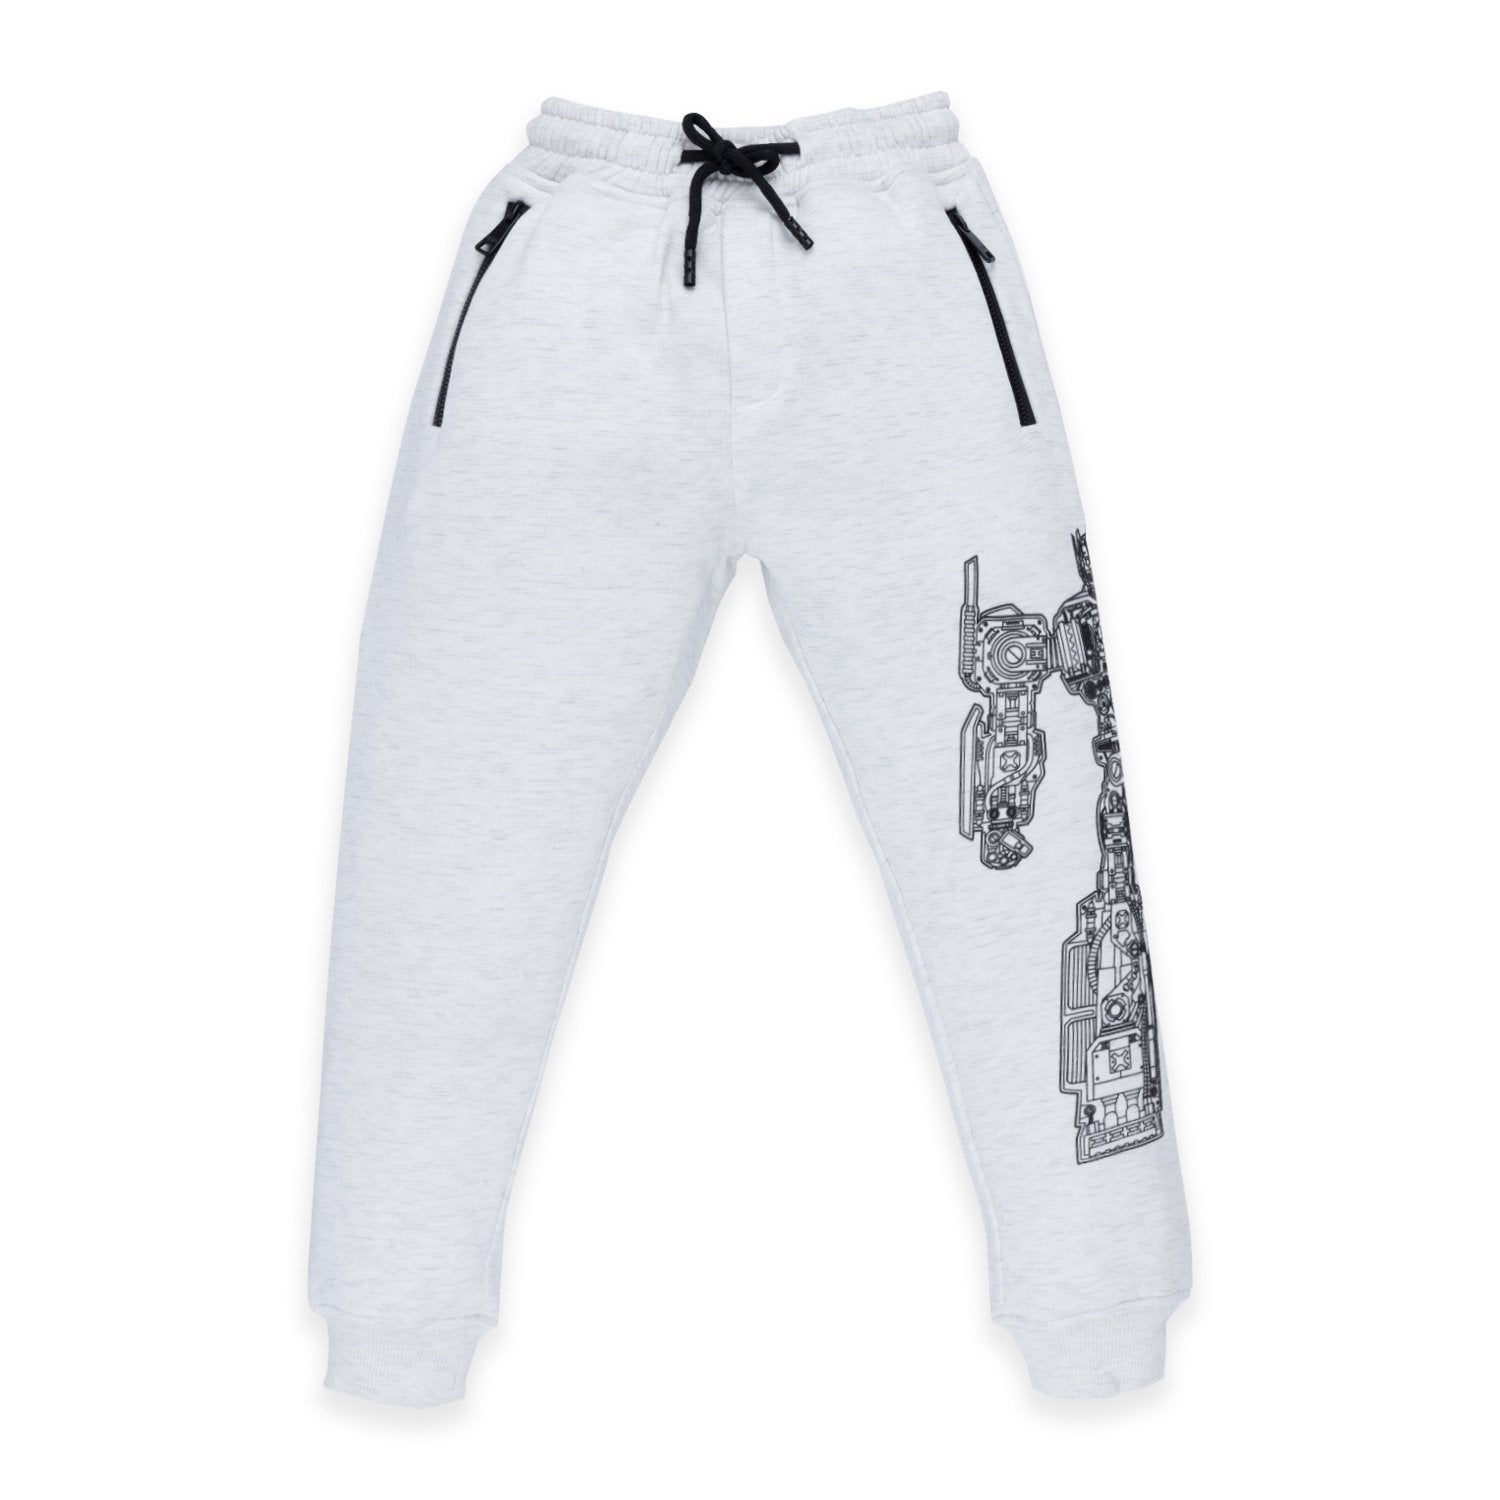 joggers for kids